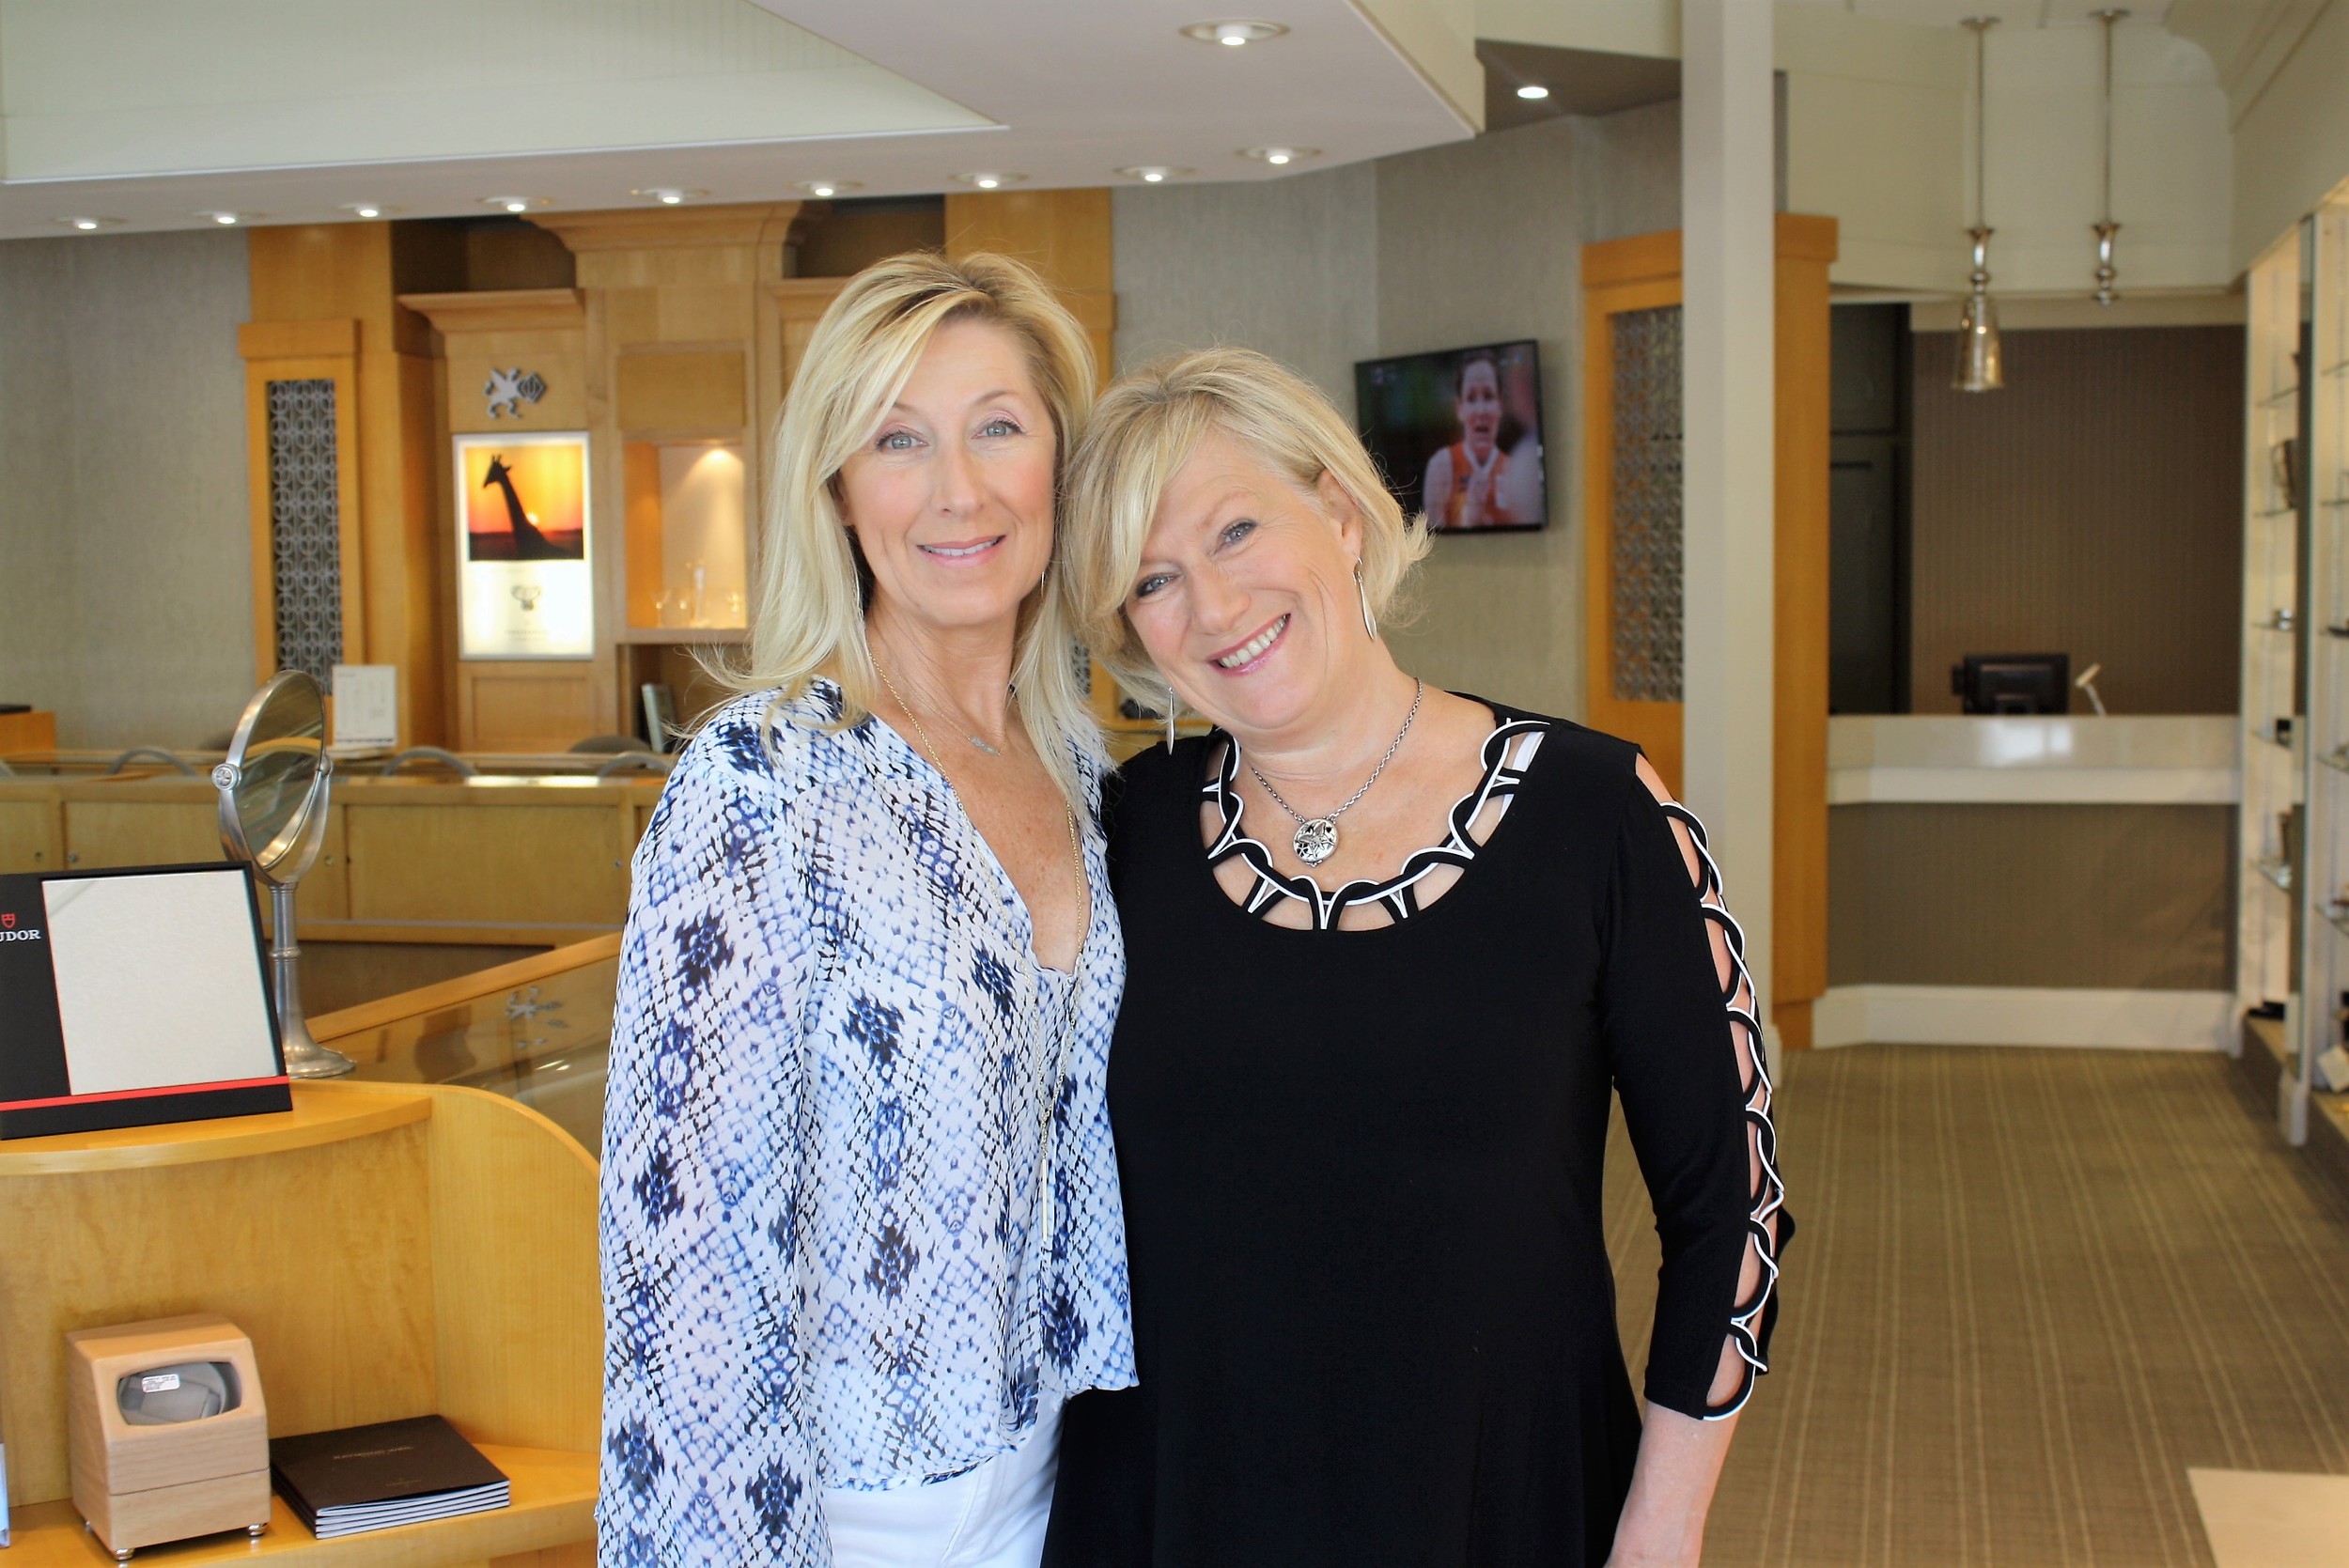 Ponte Vedra resident Dany Atkinson and her sister, “House of Cards” actress Jayne Atkinson